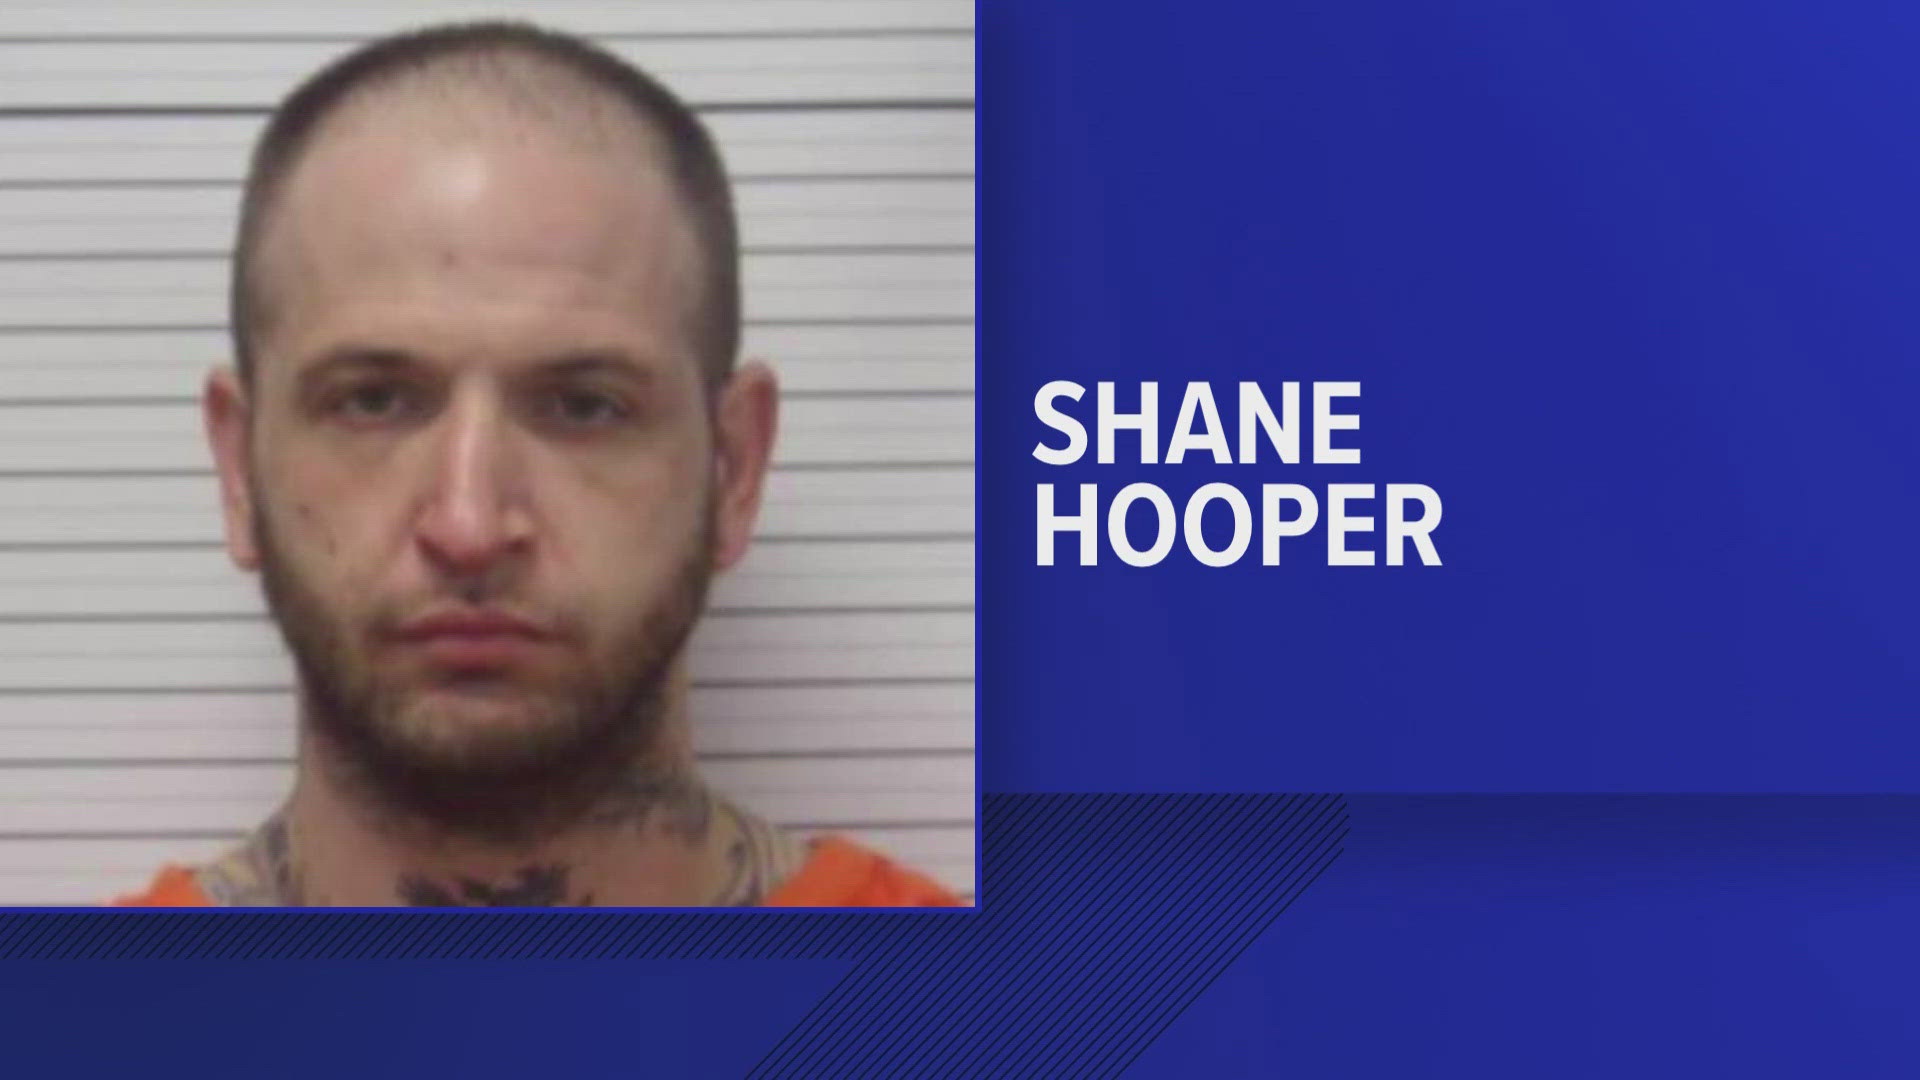 Shane Hooper pleaded guilty to two counts of rape, two counts of kidnapping, two counts of felonious assault and one count of strangulation.